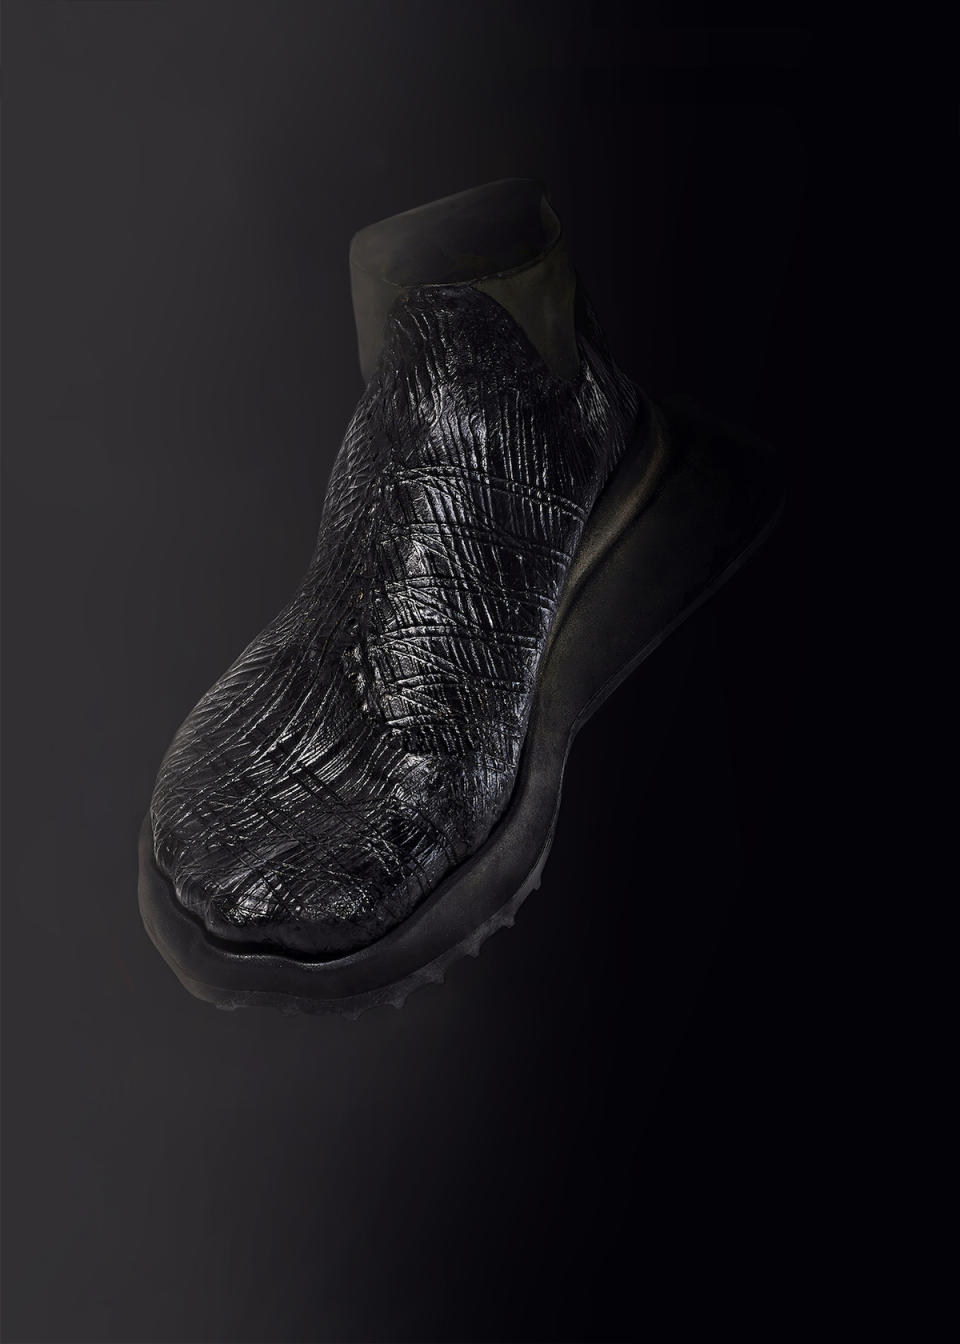 The sneaker grown from bacteria.